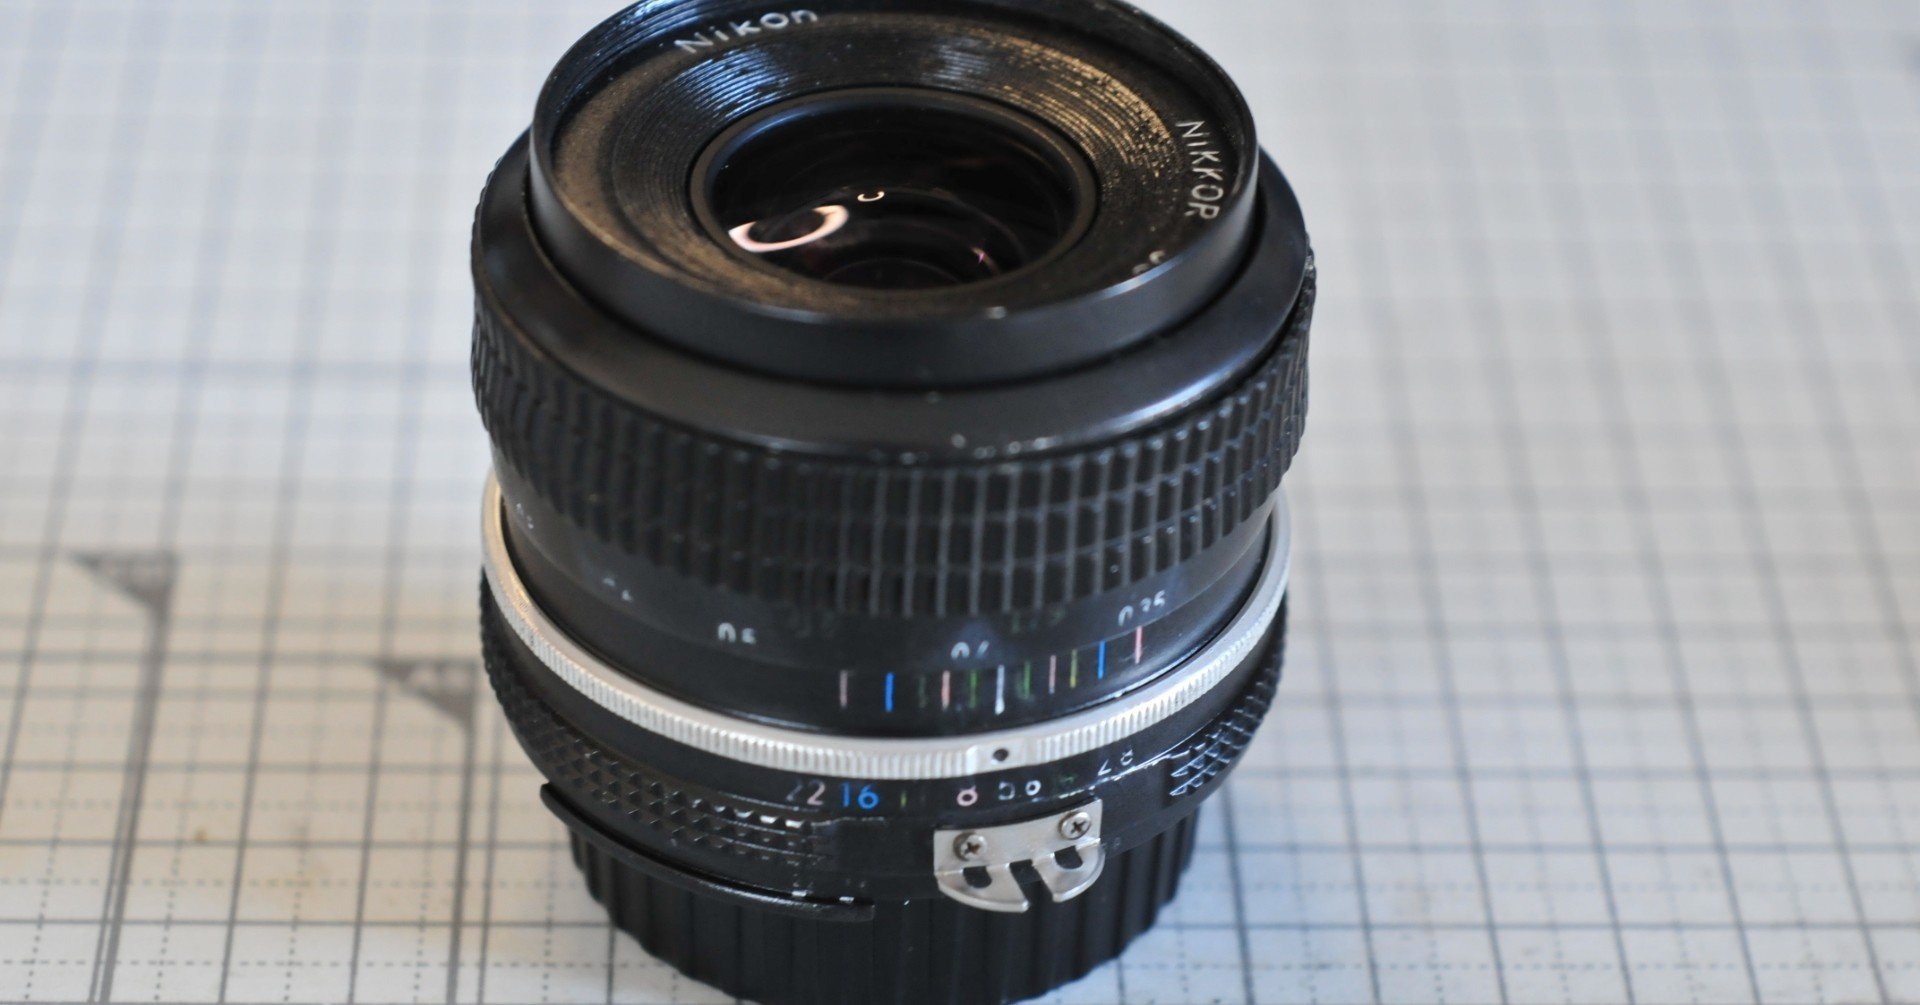 Nikon ニコン New Nikkor 28mm f2.8 Ai改